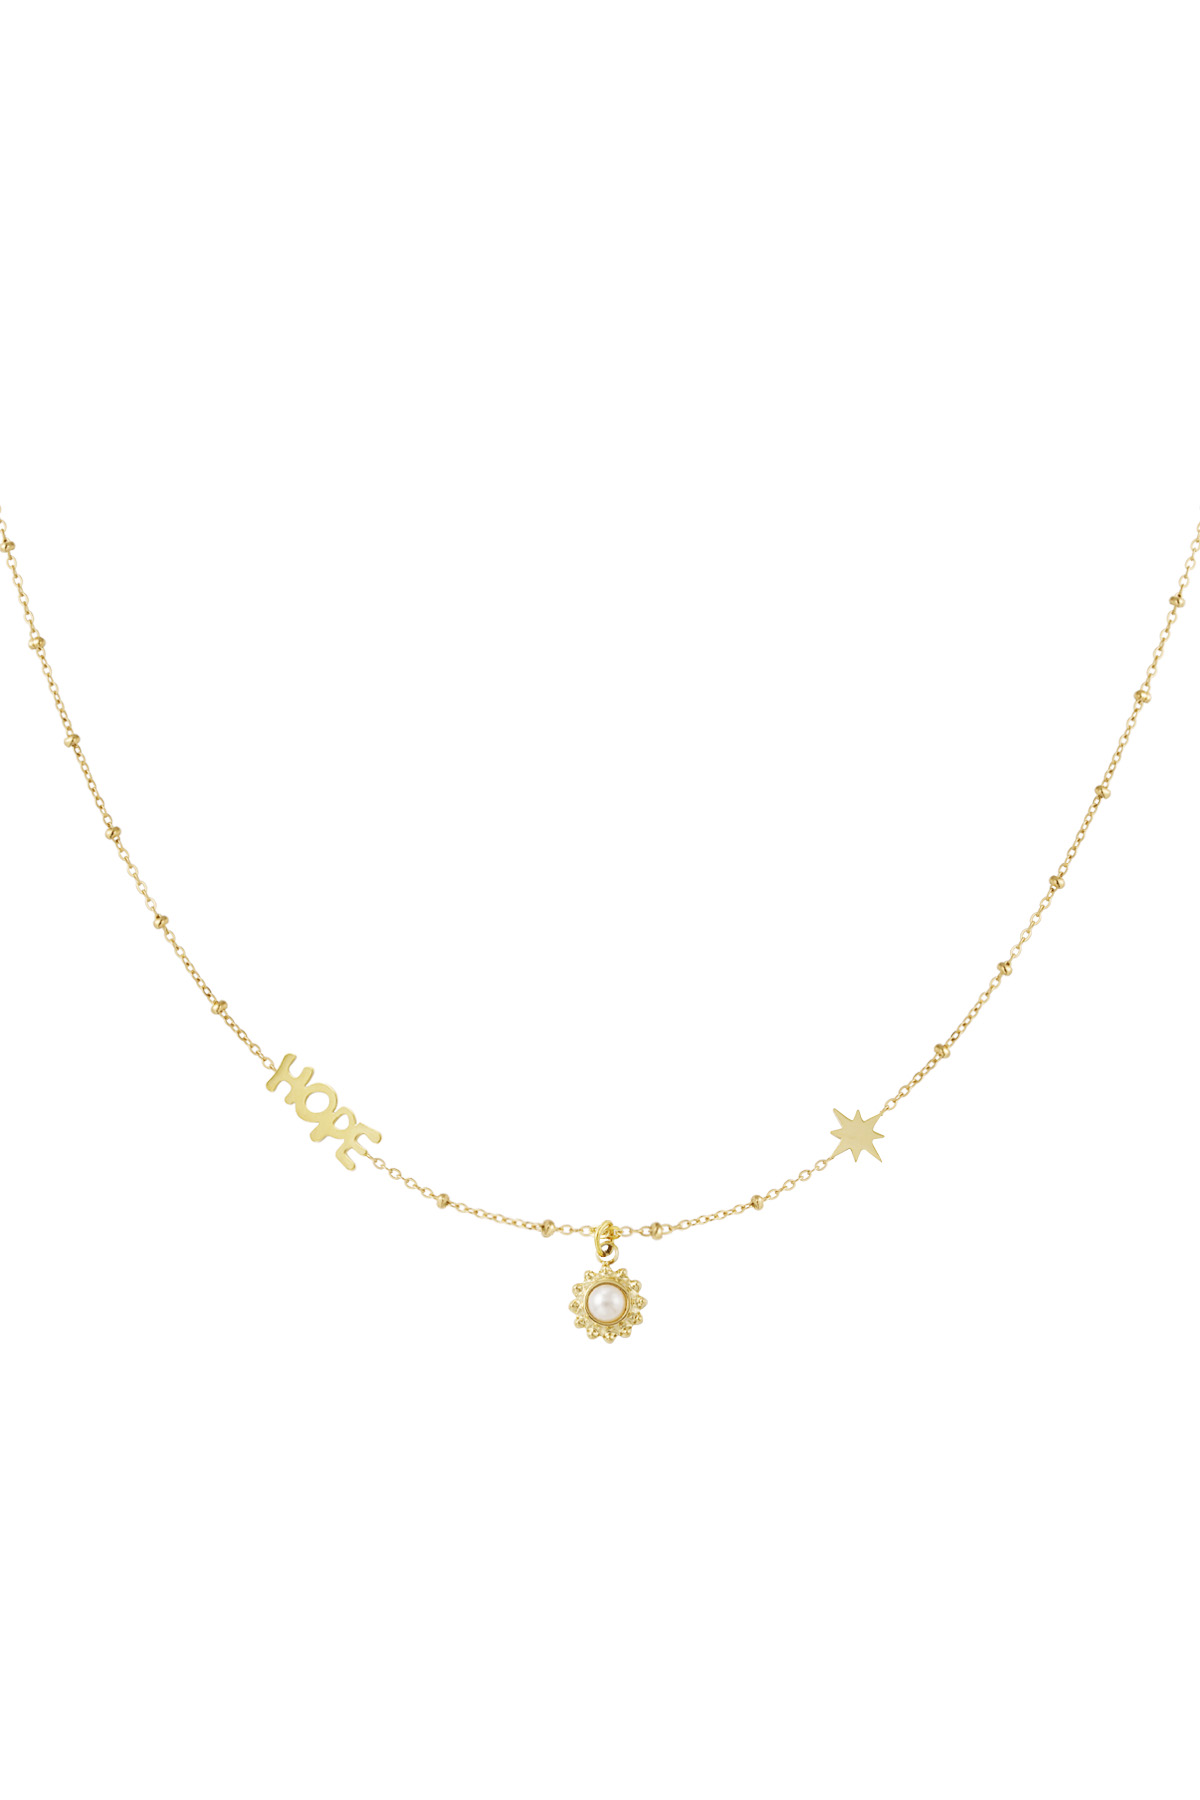 Ball chain with hope and pendants - gold h5 